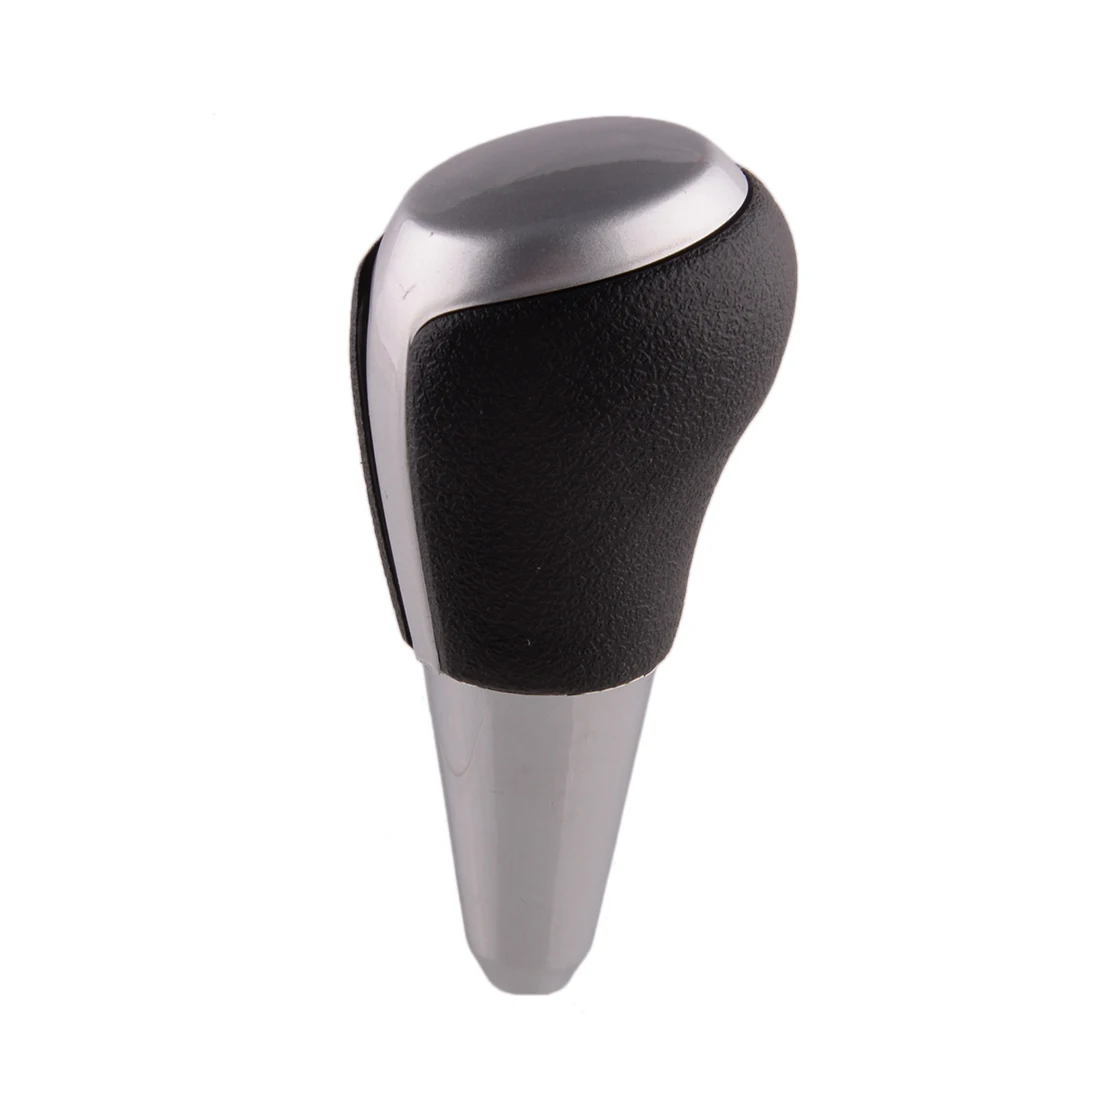 Car Interior Automatic Gear Shift Knob Shifter Lever Head Fit for Toyota Corolla Yaris Prius C Camry Rav4 2015 2016 2017 ABS